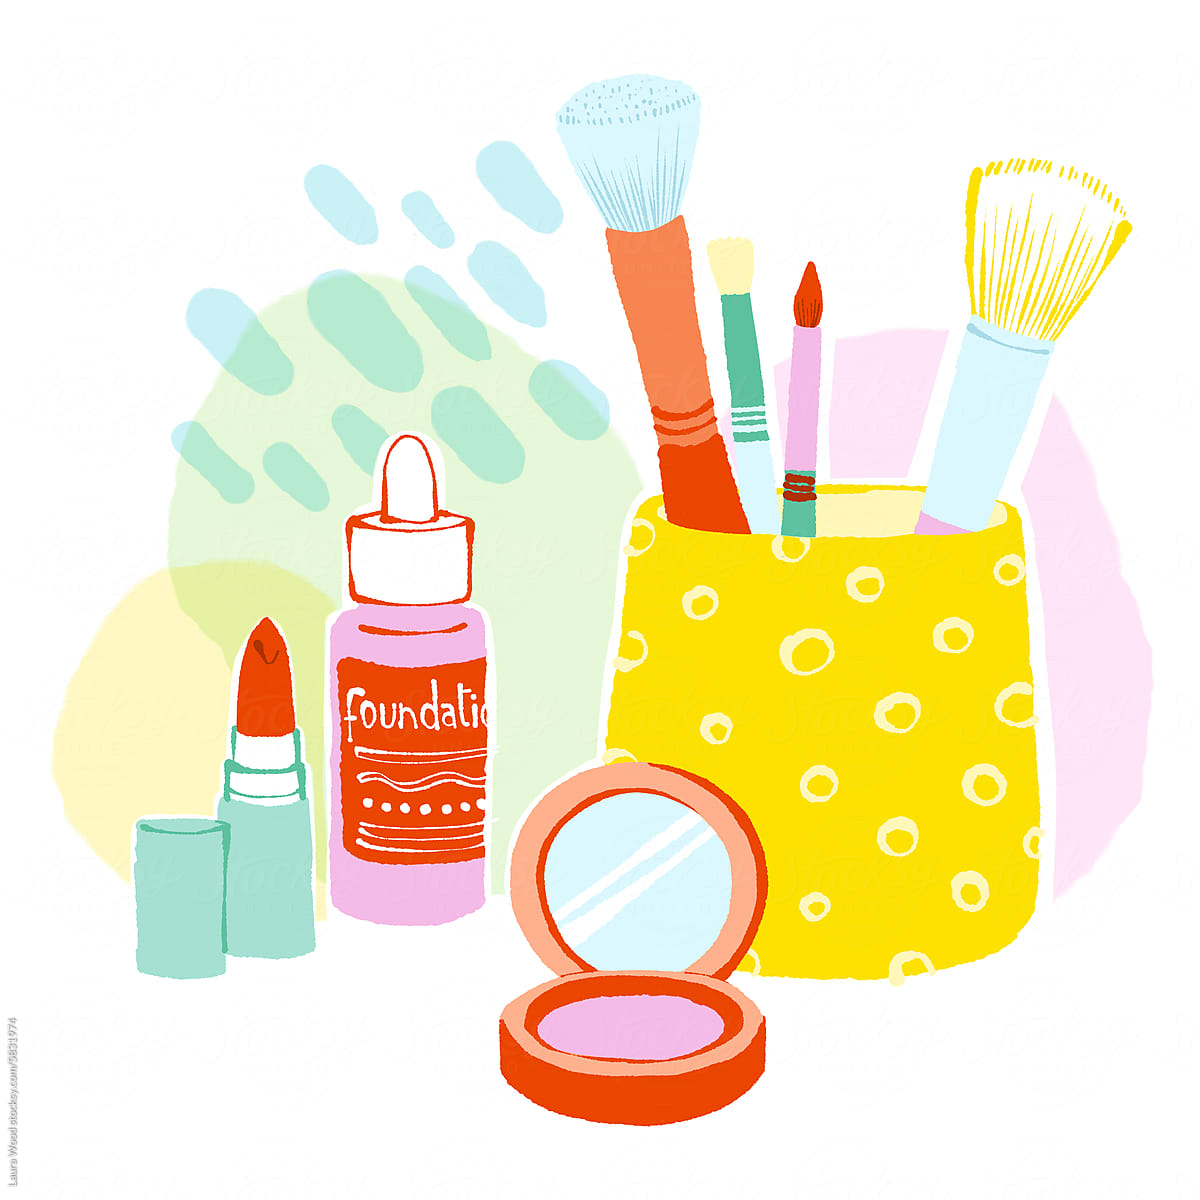 Bathroom products - Make up